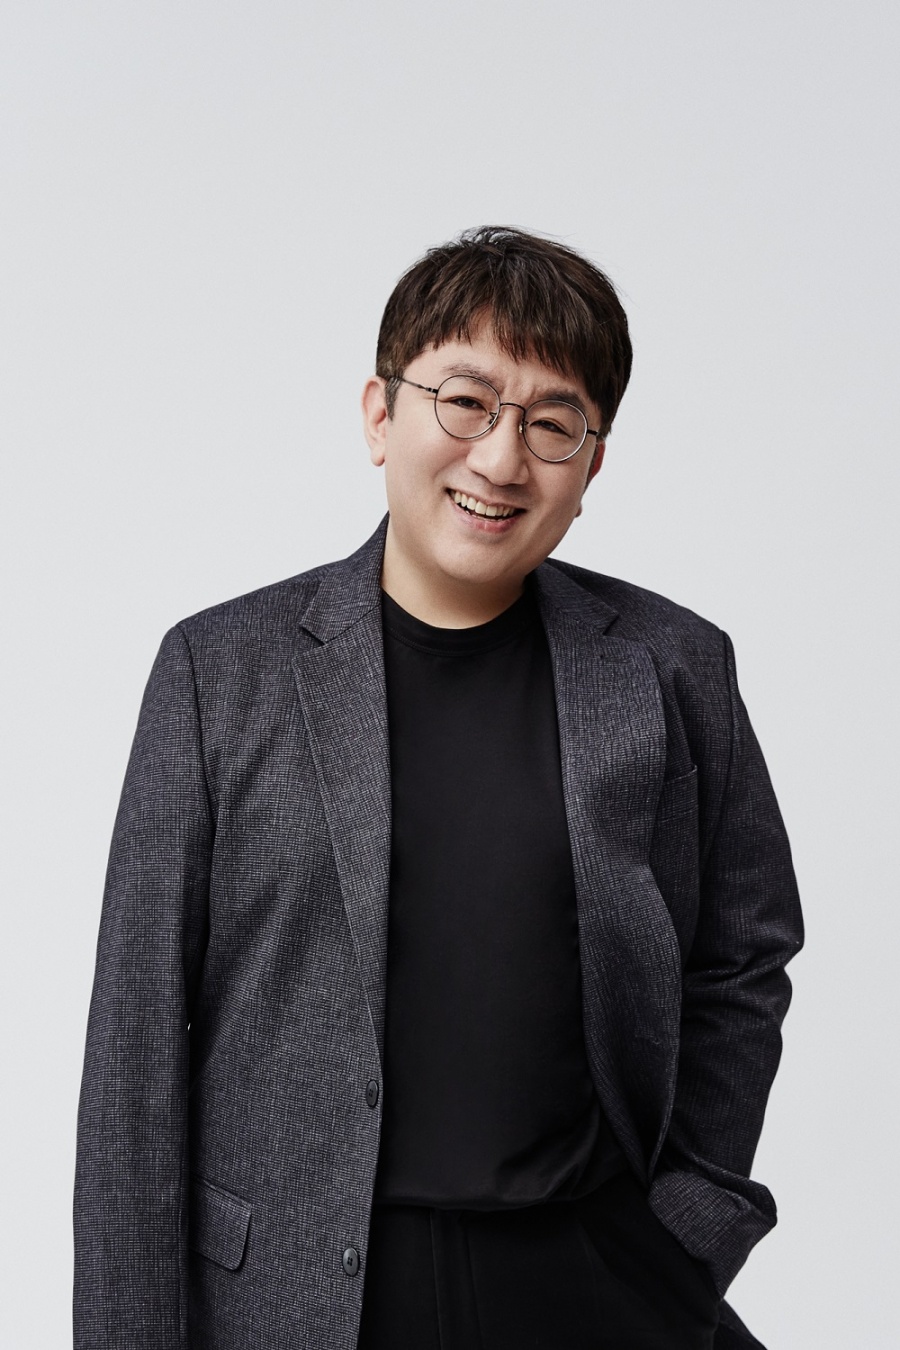 Bang Si-Hyuk, CEO of Big Hit Entertainment, was named New Power Generation.On the 7th (local time), Billboard, a media specializing in United States of America music, published the Meet Musics New Power Generation: 25 Top Innovators, the next generation leader leading the World music market, and published an article on Bang Si-Hyuks representative.BTS, formed by composer and producer Bang Si-Hyuk, has emerged in Western popular music in 2018, Billboard said. BTS has ranked 10th in the first Billboard Hot 100 with FAKE LOVE, and has made its time cover by becoming the 111st in Social 50.Billboard added that the first Korean artist to have two albums on the Billboard 200, and sold out the first stadium show at United States of America in an hour.We have not set up a special strategy to make it a world pop group, said Bang Si-Hyuk, CEO of Billboard. We work horizontally with BTS.I promised the members that their music should come from their inner story.Bang Si-Hyuk was selected as the International Power Players by Billboard in May last year and was introduced as a leader in moving the former World music market.